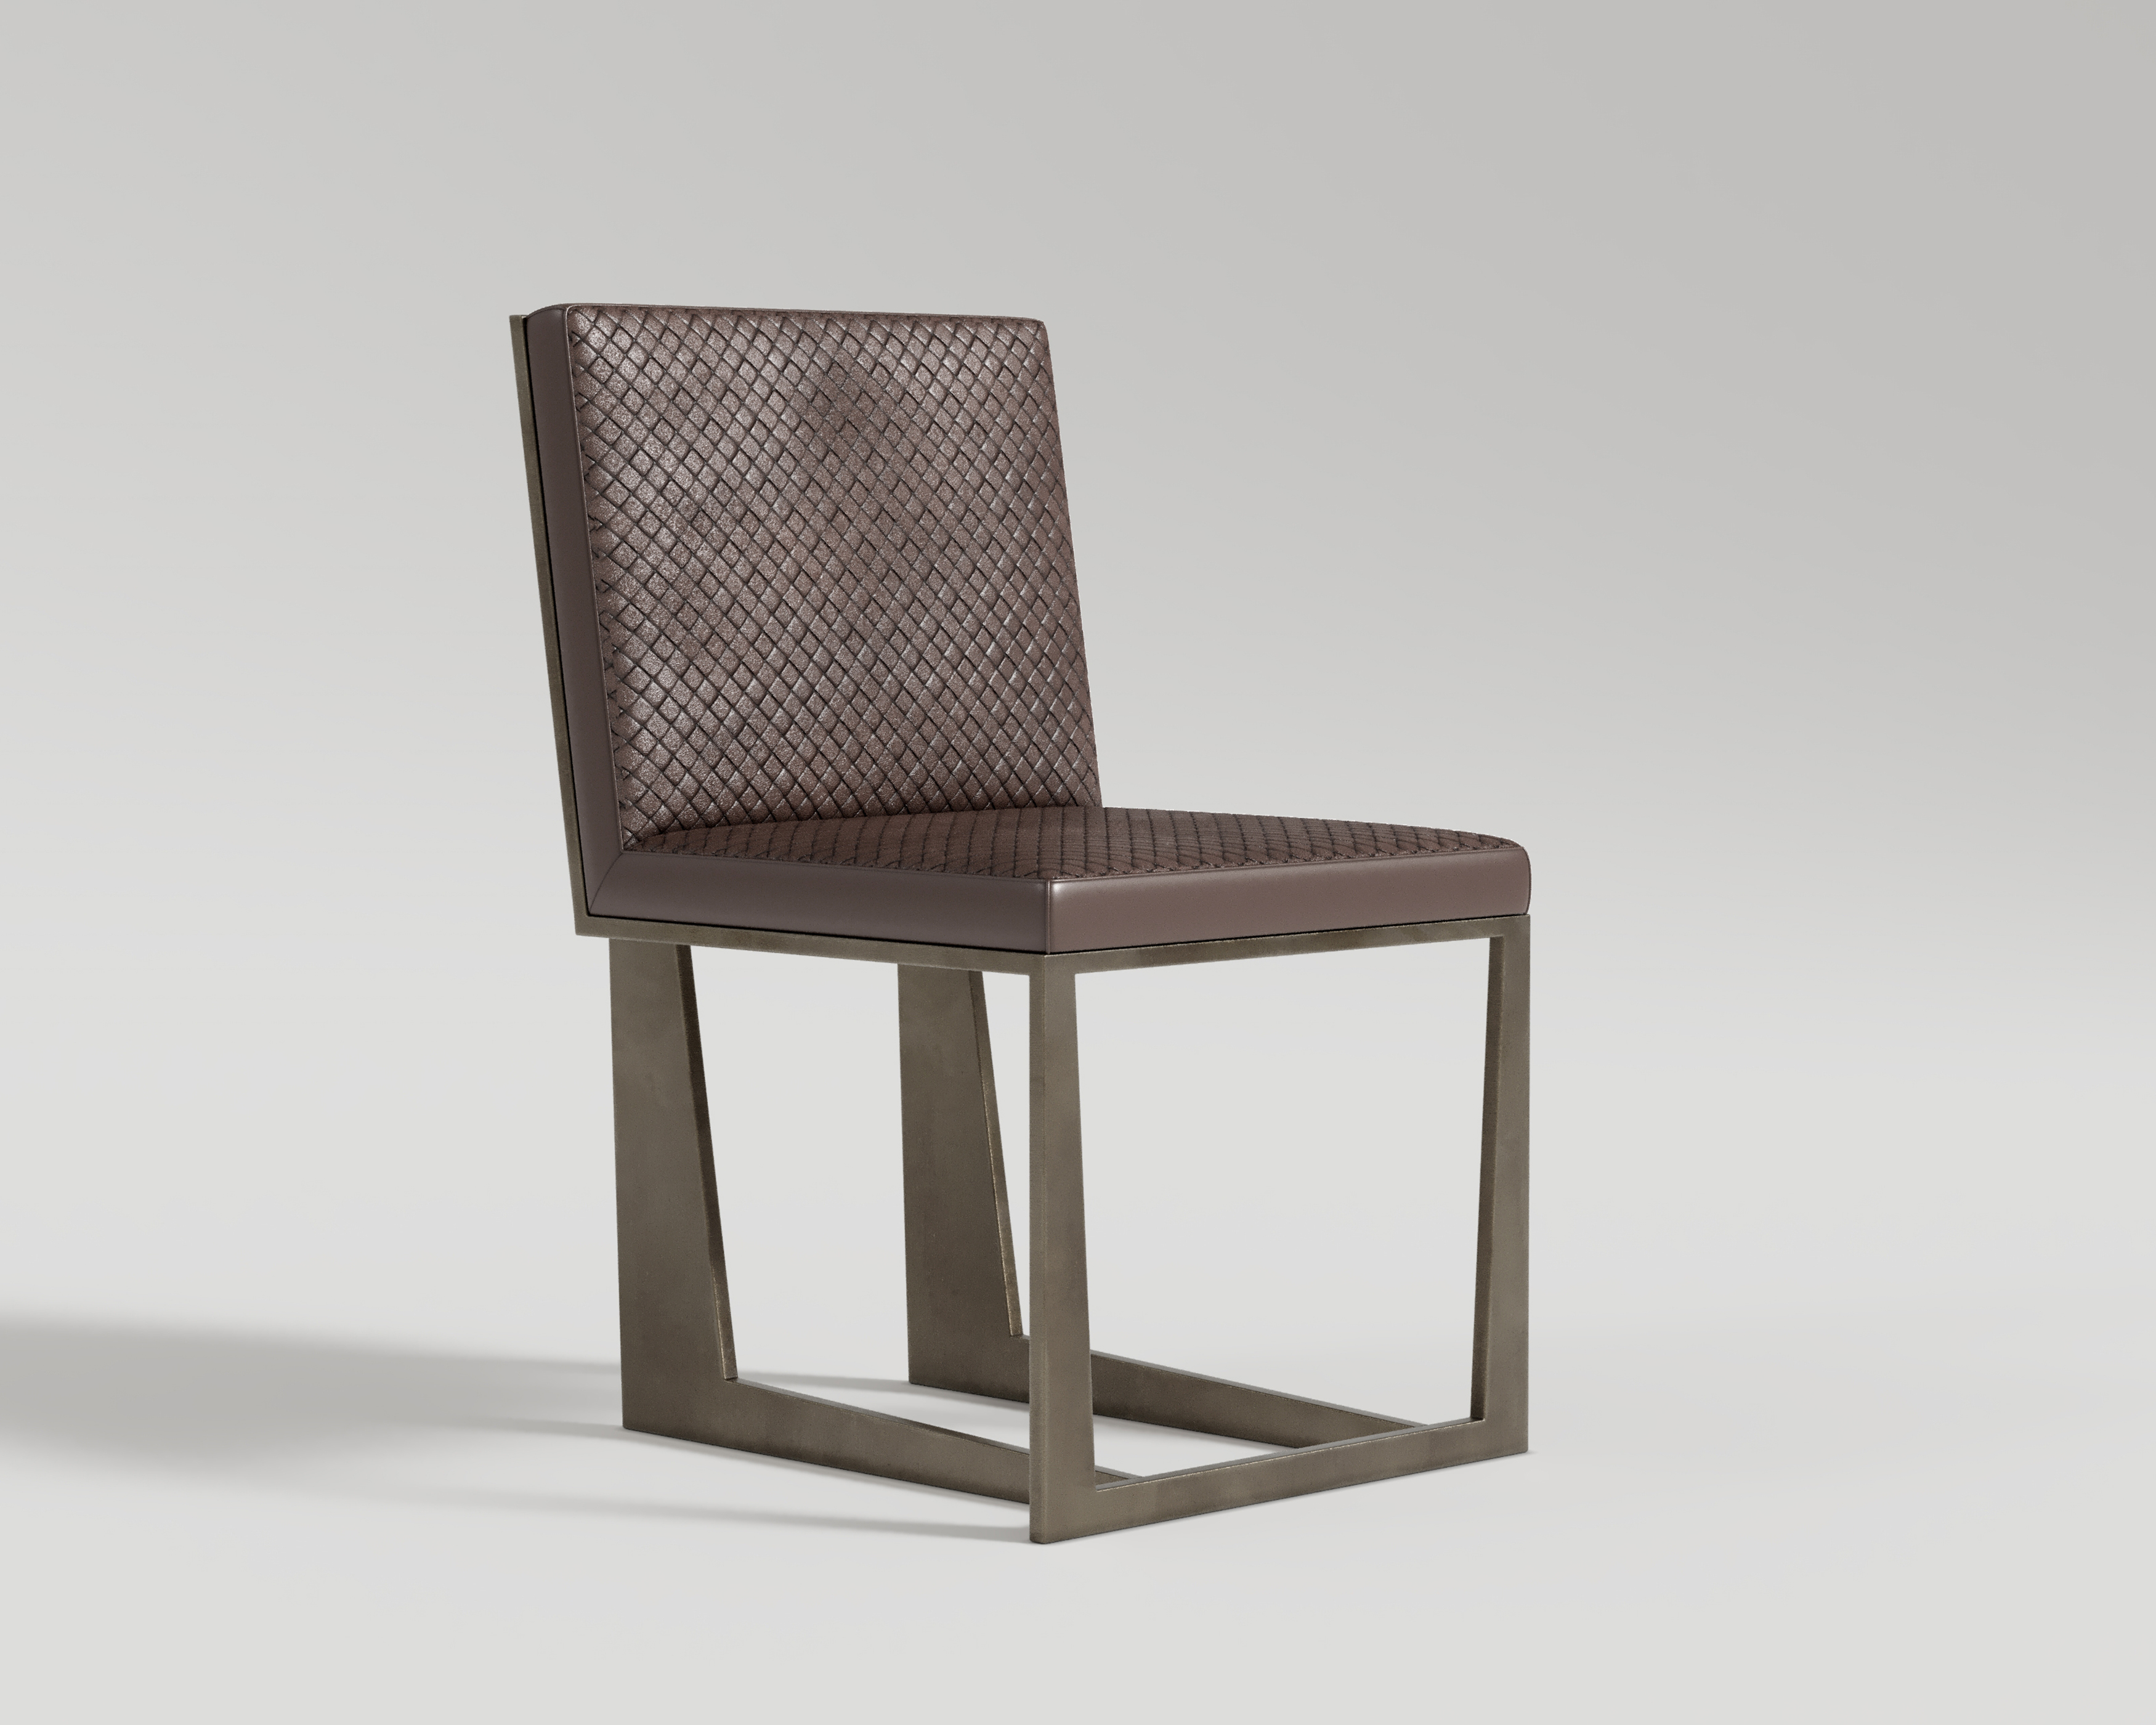 Affilato_chair_leather_patina_bronze